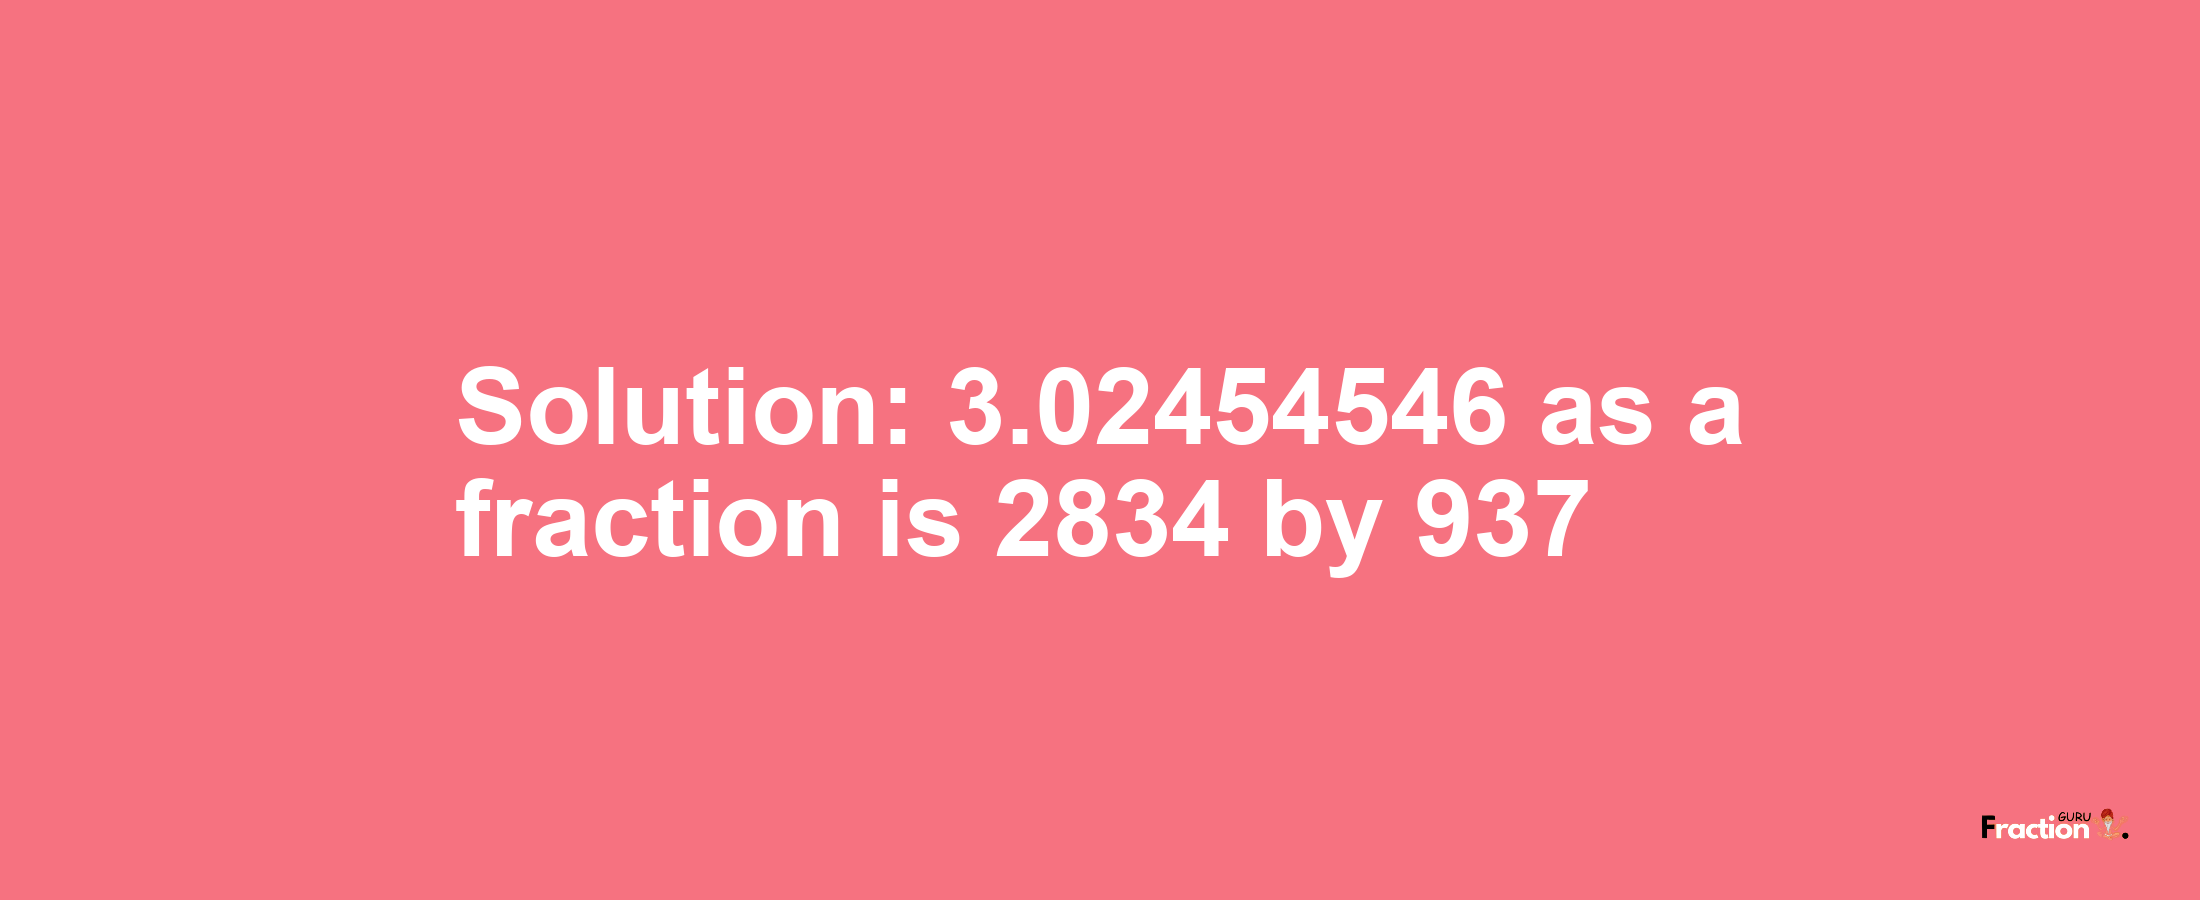 Solution:3.02454546 as a fraction is 2834/937